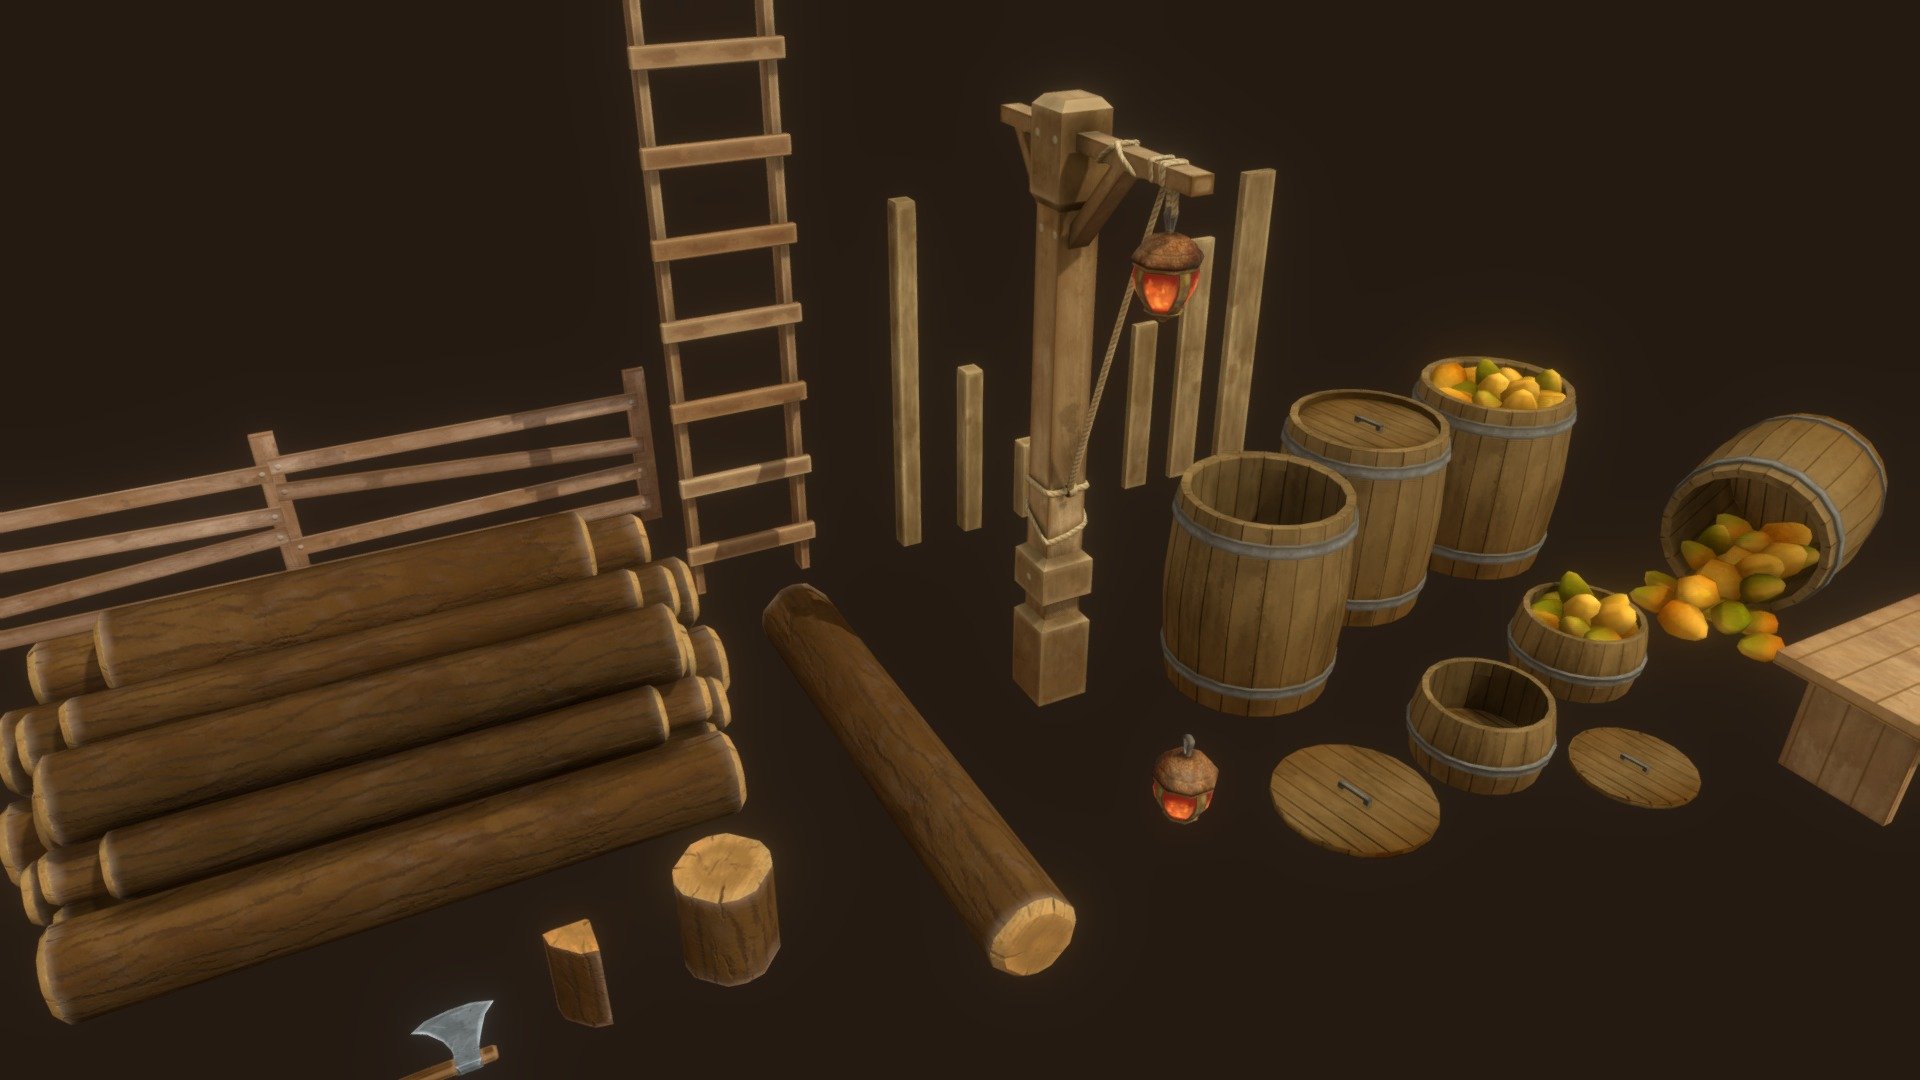 Artstation: https://www.artstation.com/artwork/X1wl9Y
Twitter: https://twitter.com/branch_uwu
set of props I made for a project im working on. Themed around a medieval fantasy fruit tree orchard 3d model